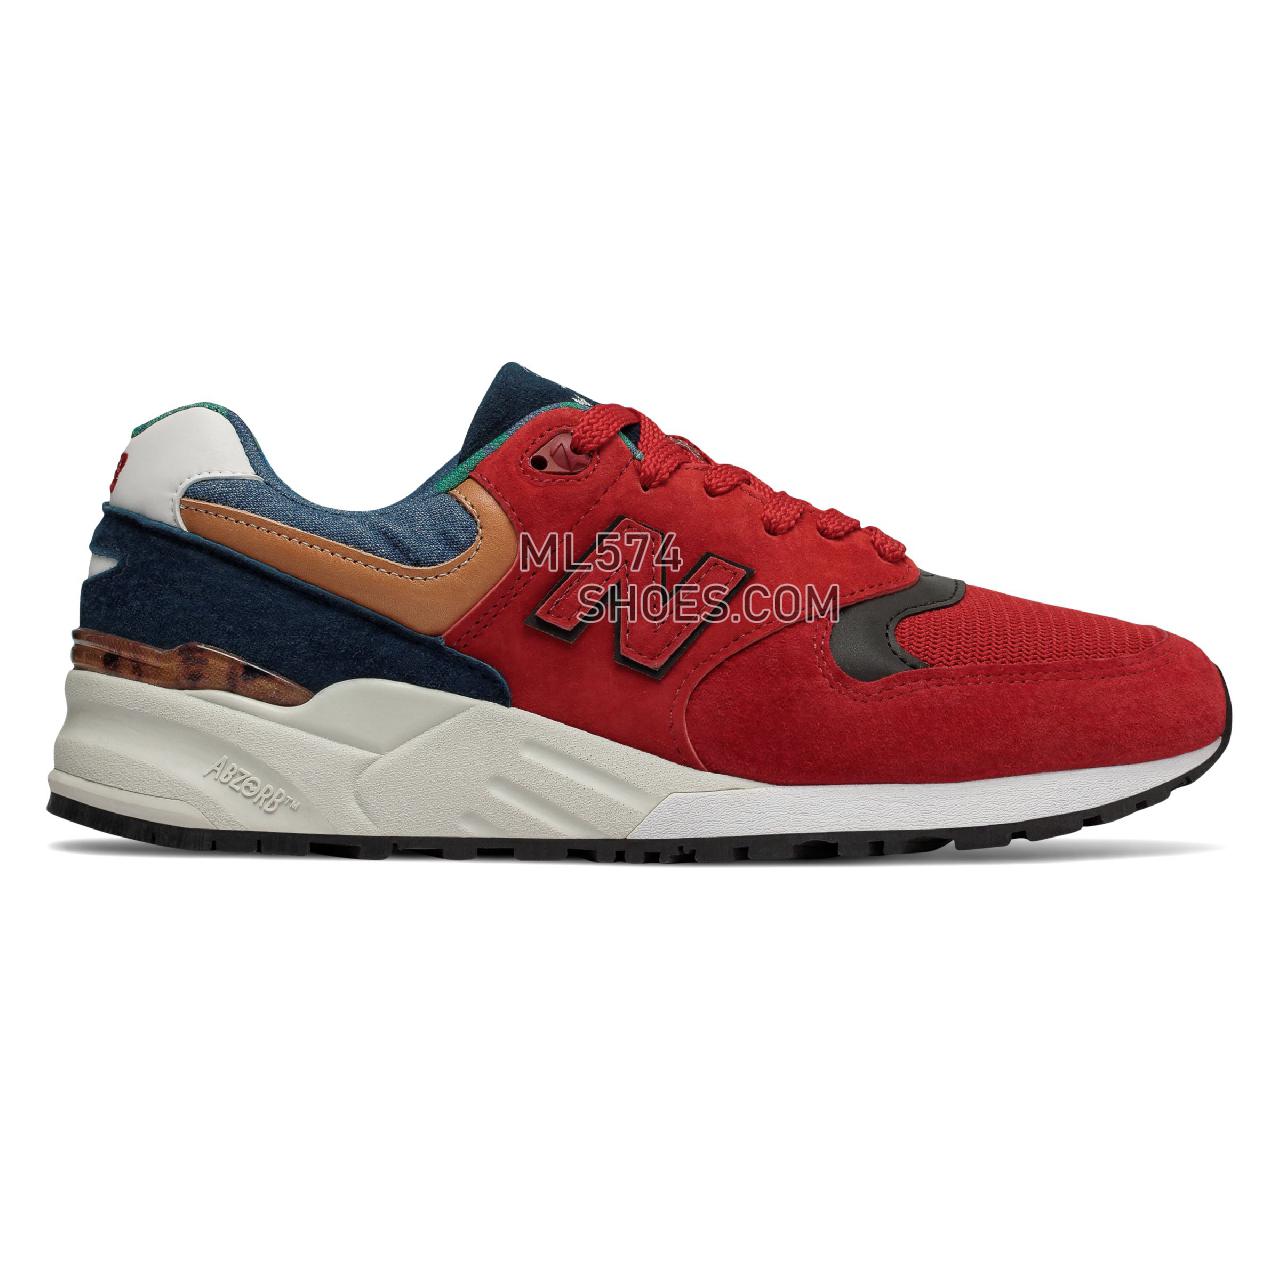 New Balance 999 Made in US - Men's 999 - Classic Really Red - M999WEB